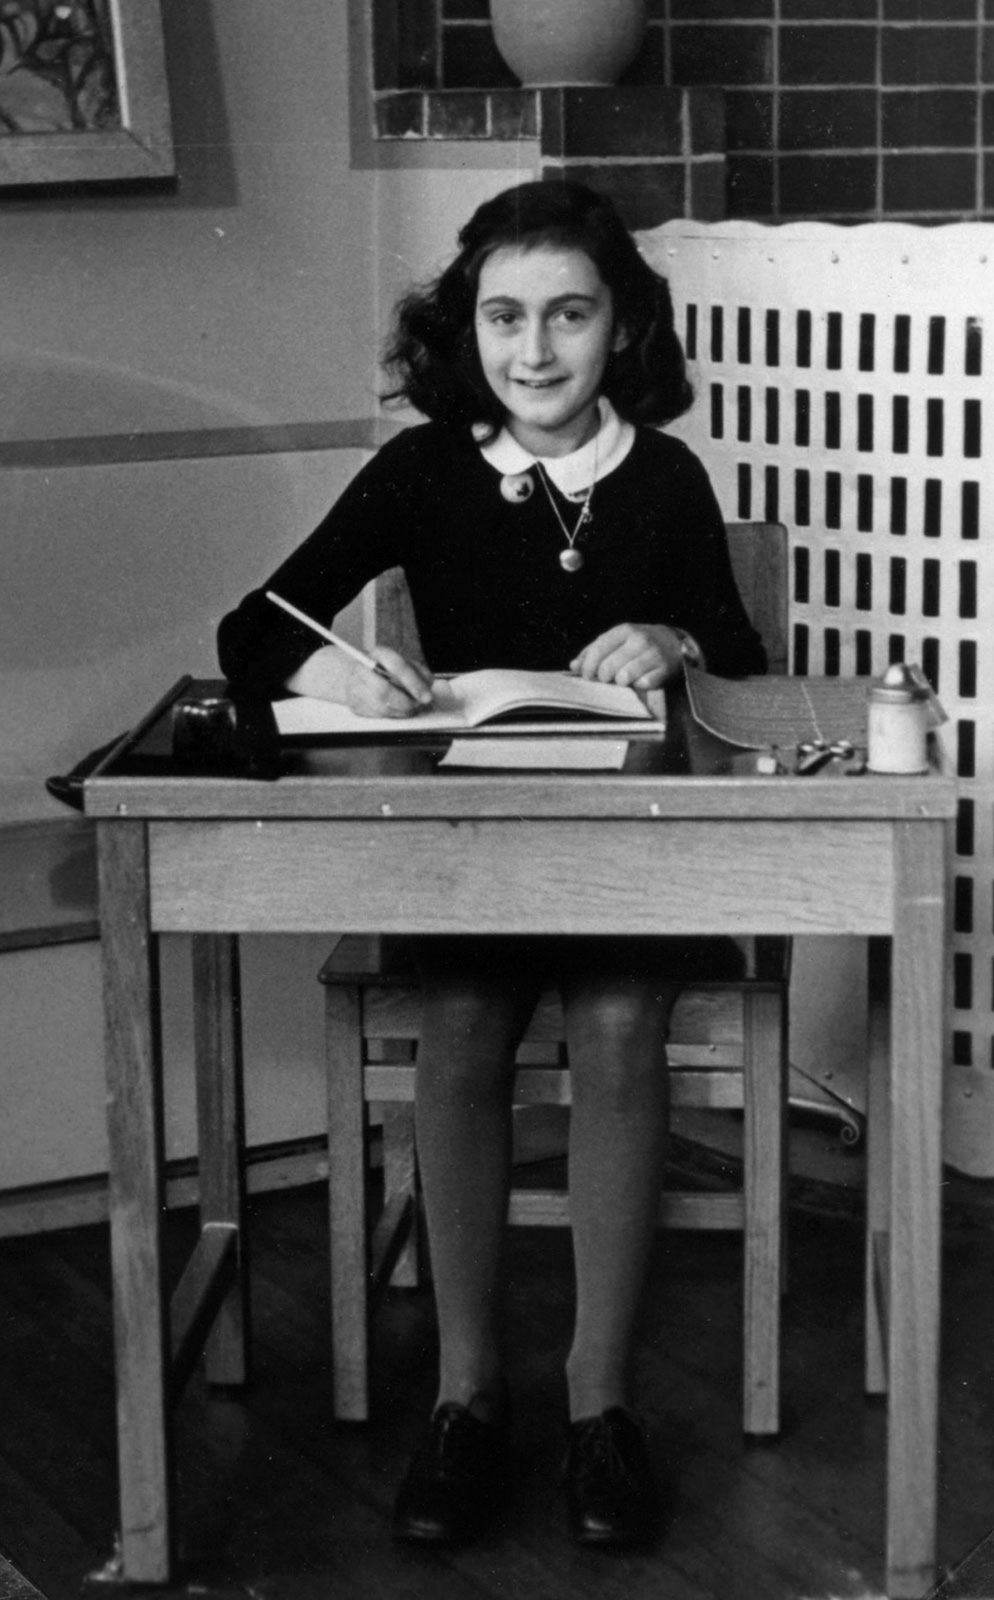 Anne Frank was attracted to girls